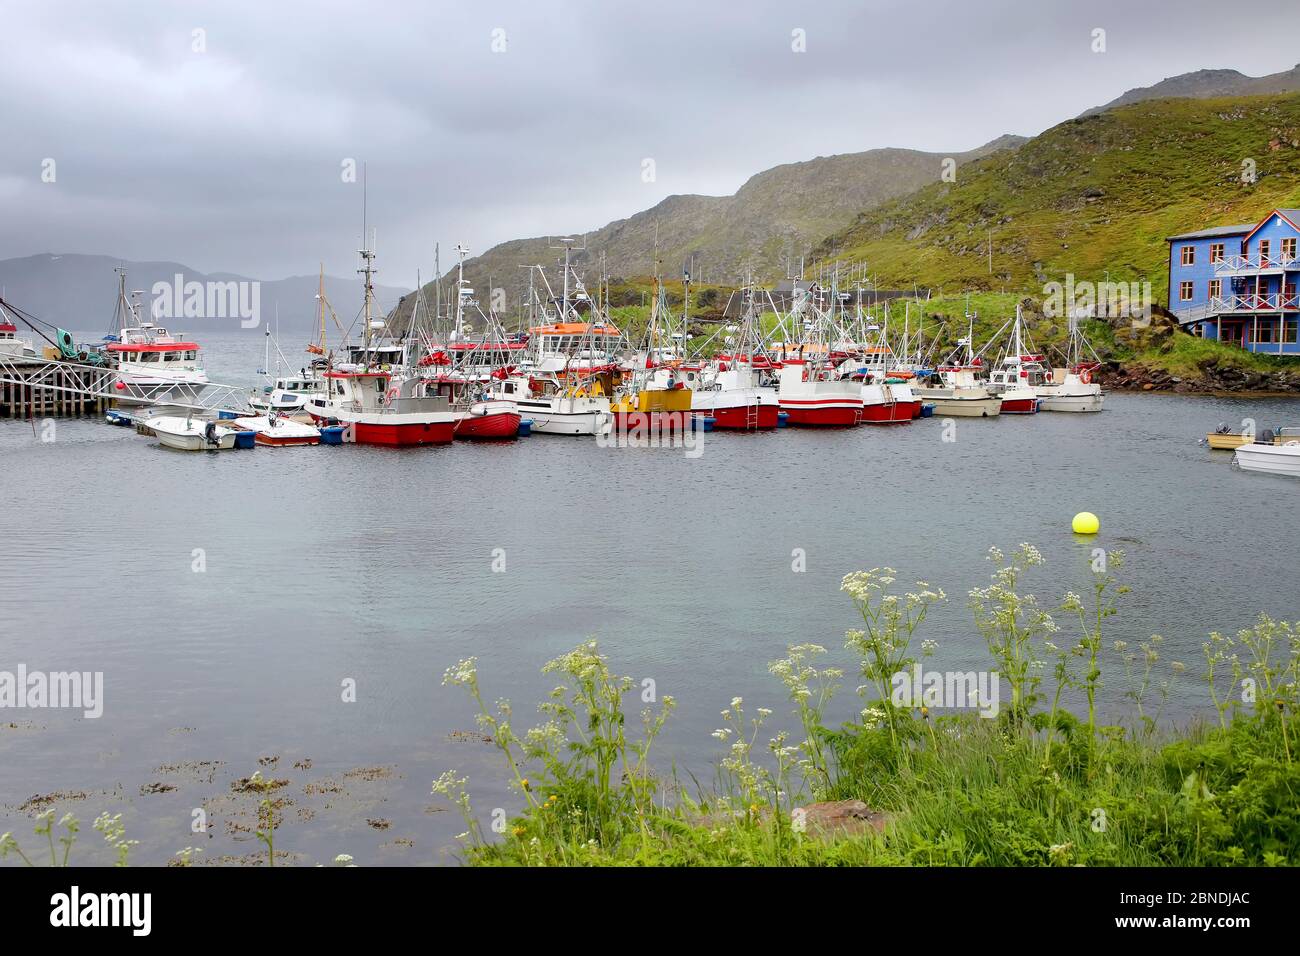 Beautiful fishing village of Kamoyvaer which lies along the Kamoyfjorden on the east side of the island of Mageroya, close to the town of Honningsvag. Stock Photo